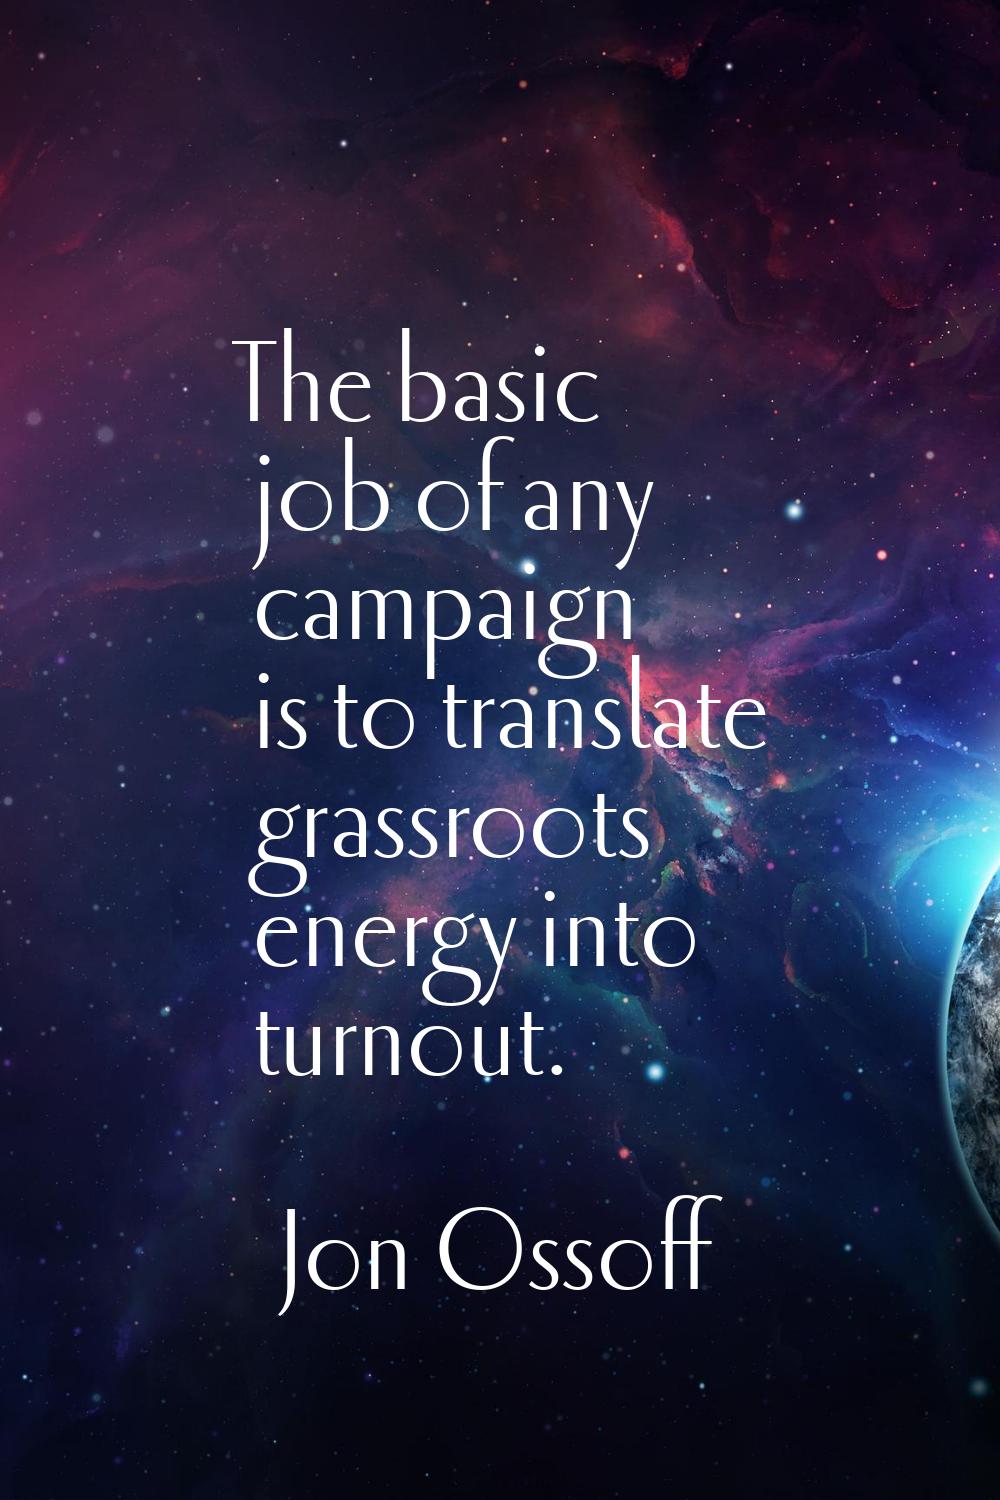 The basic job of any campaign is to translate grassroots energy into turnout.